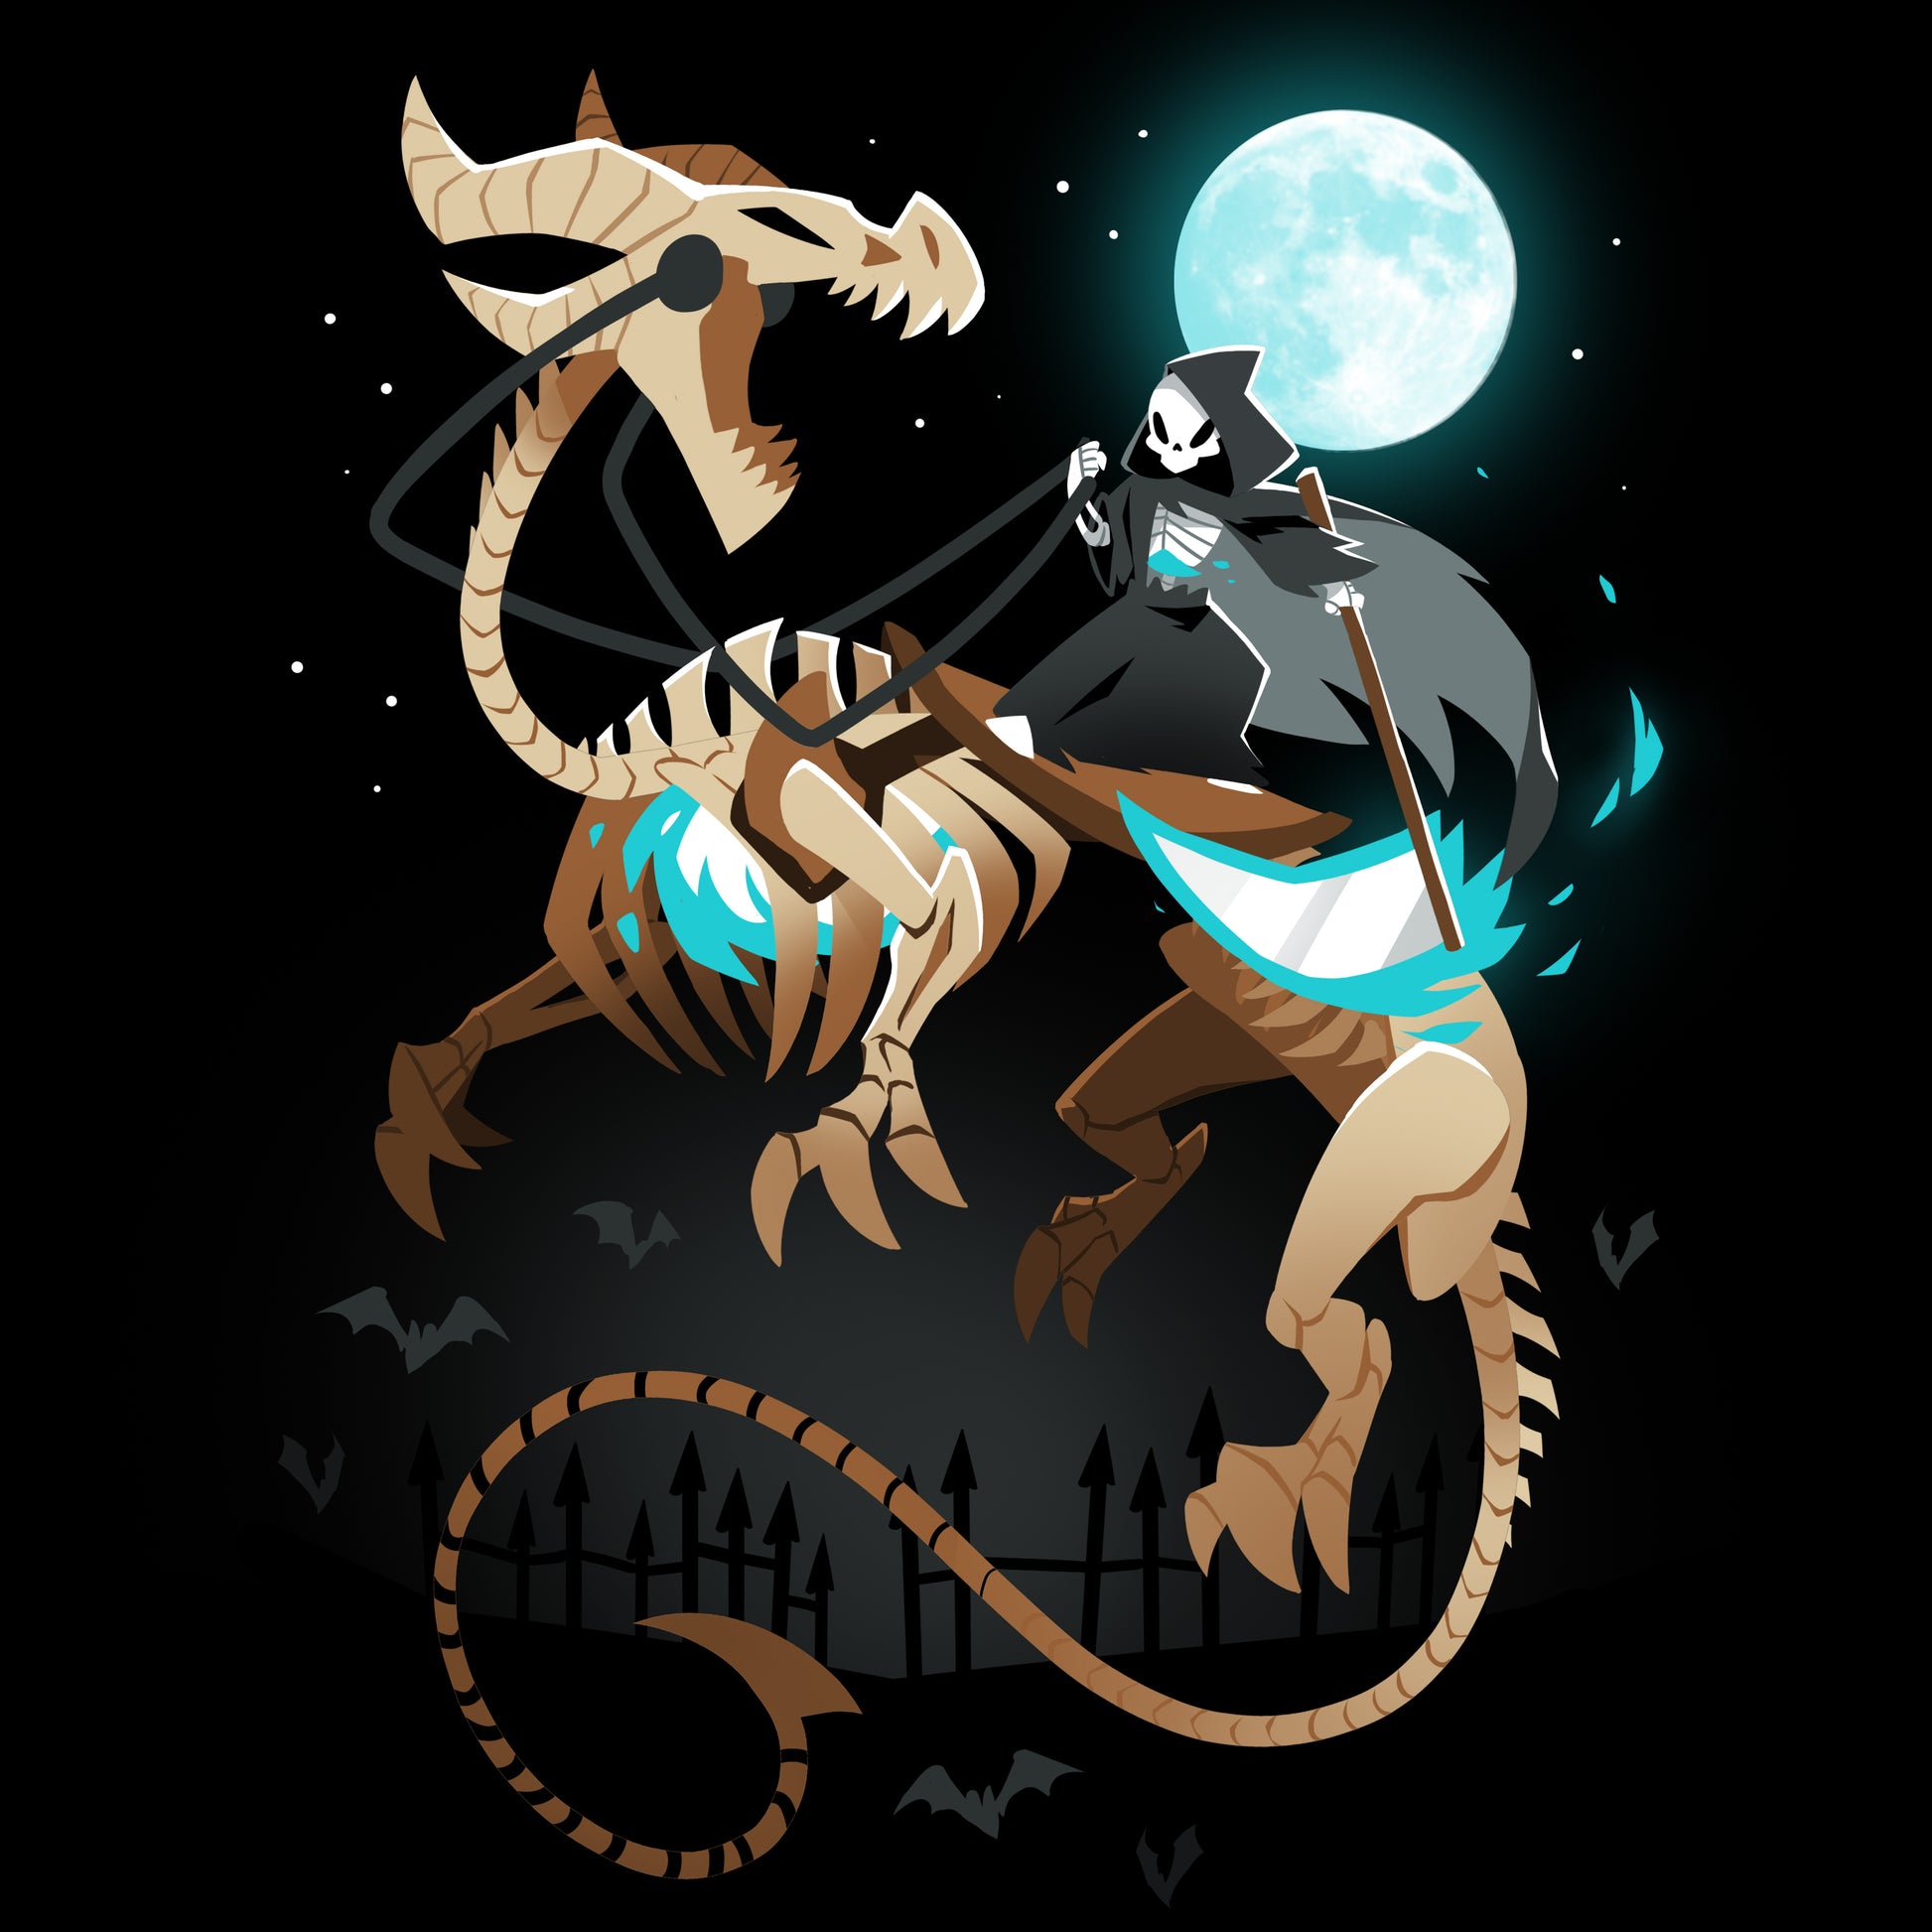 A Grim Knight riding a black dragon in the night sky, featured on a TeeTurtle T-shirt.